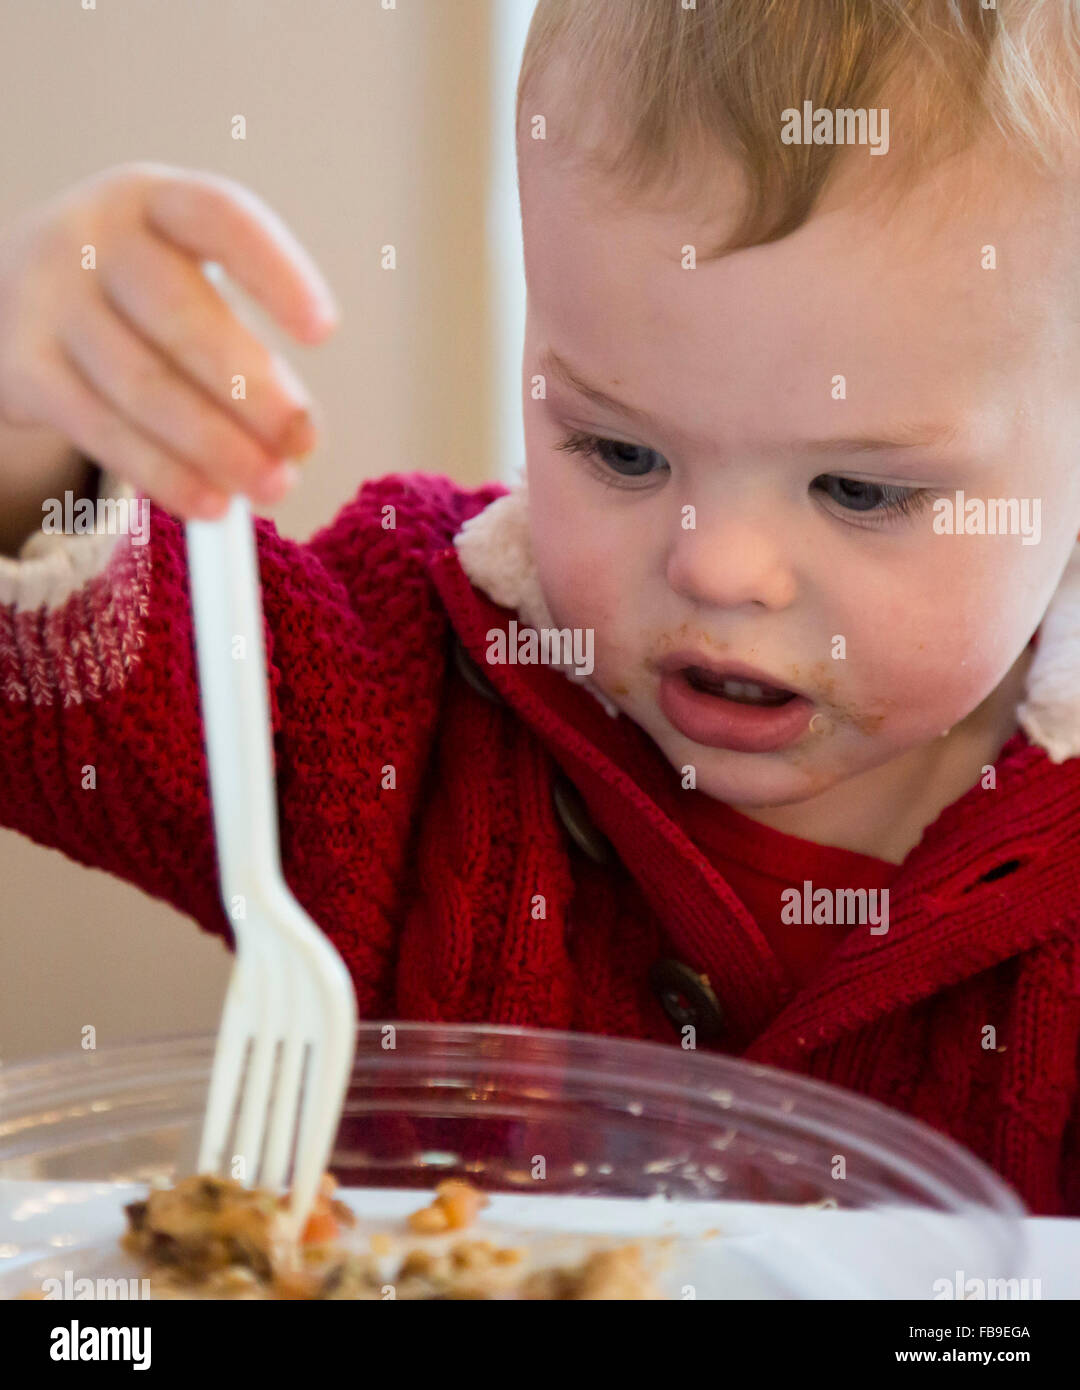 Denver, Colorado - Adam Hjermstad Jr., 17 months old, learns to eat with a fork. Stock Photo